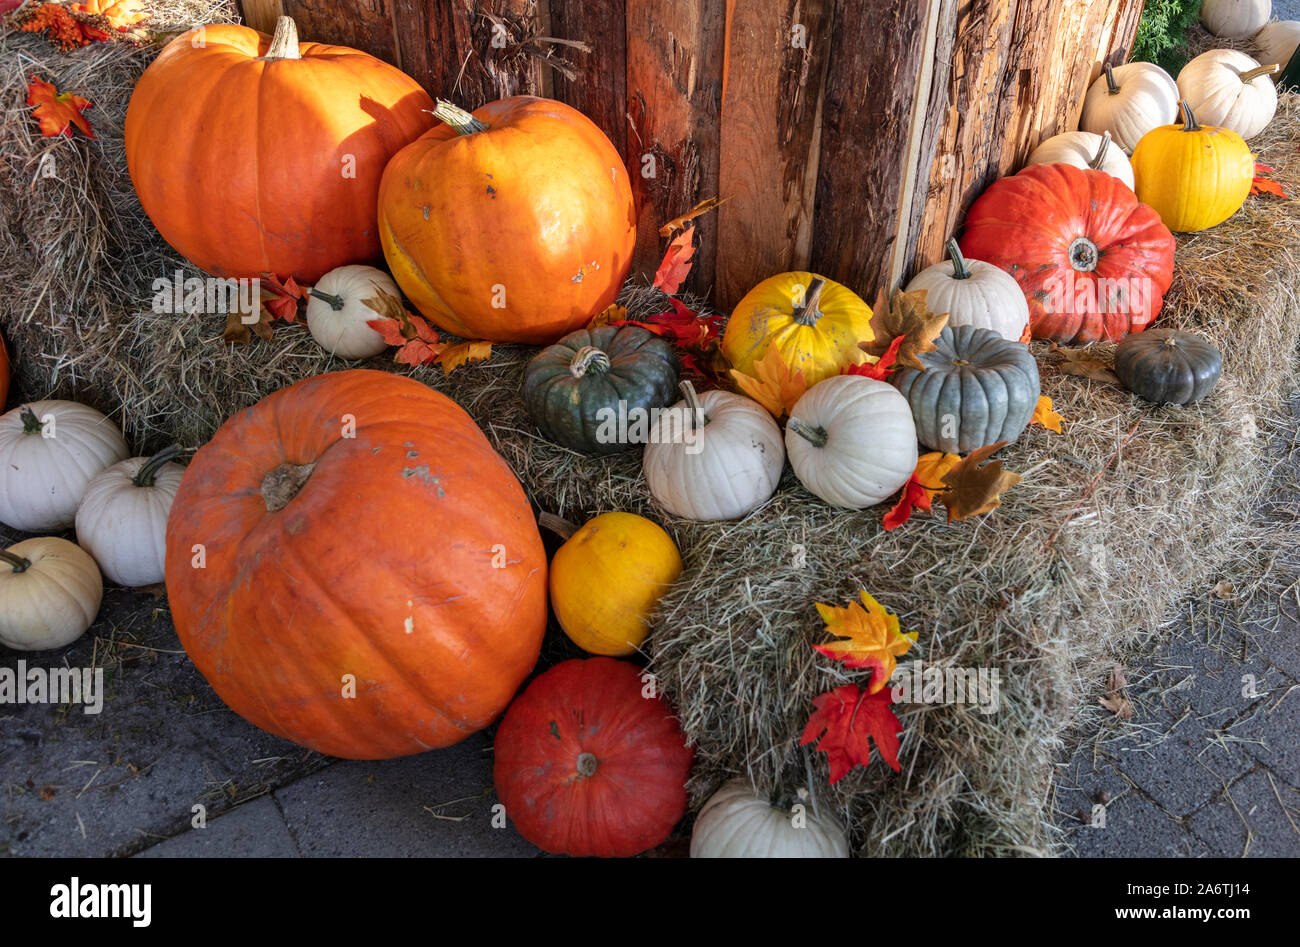 Colorful pumpkins on hay bales, close up Stock Photo